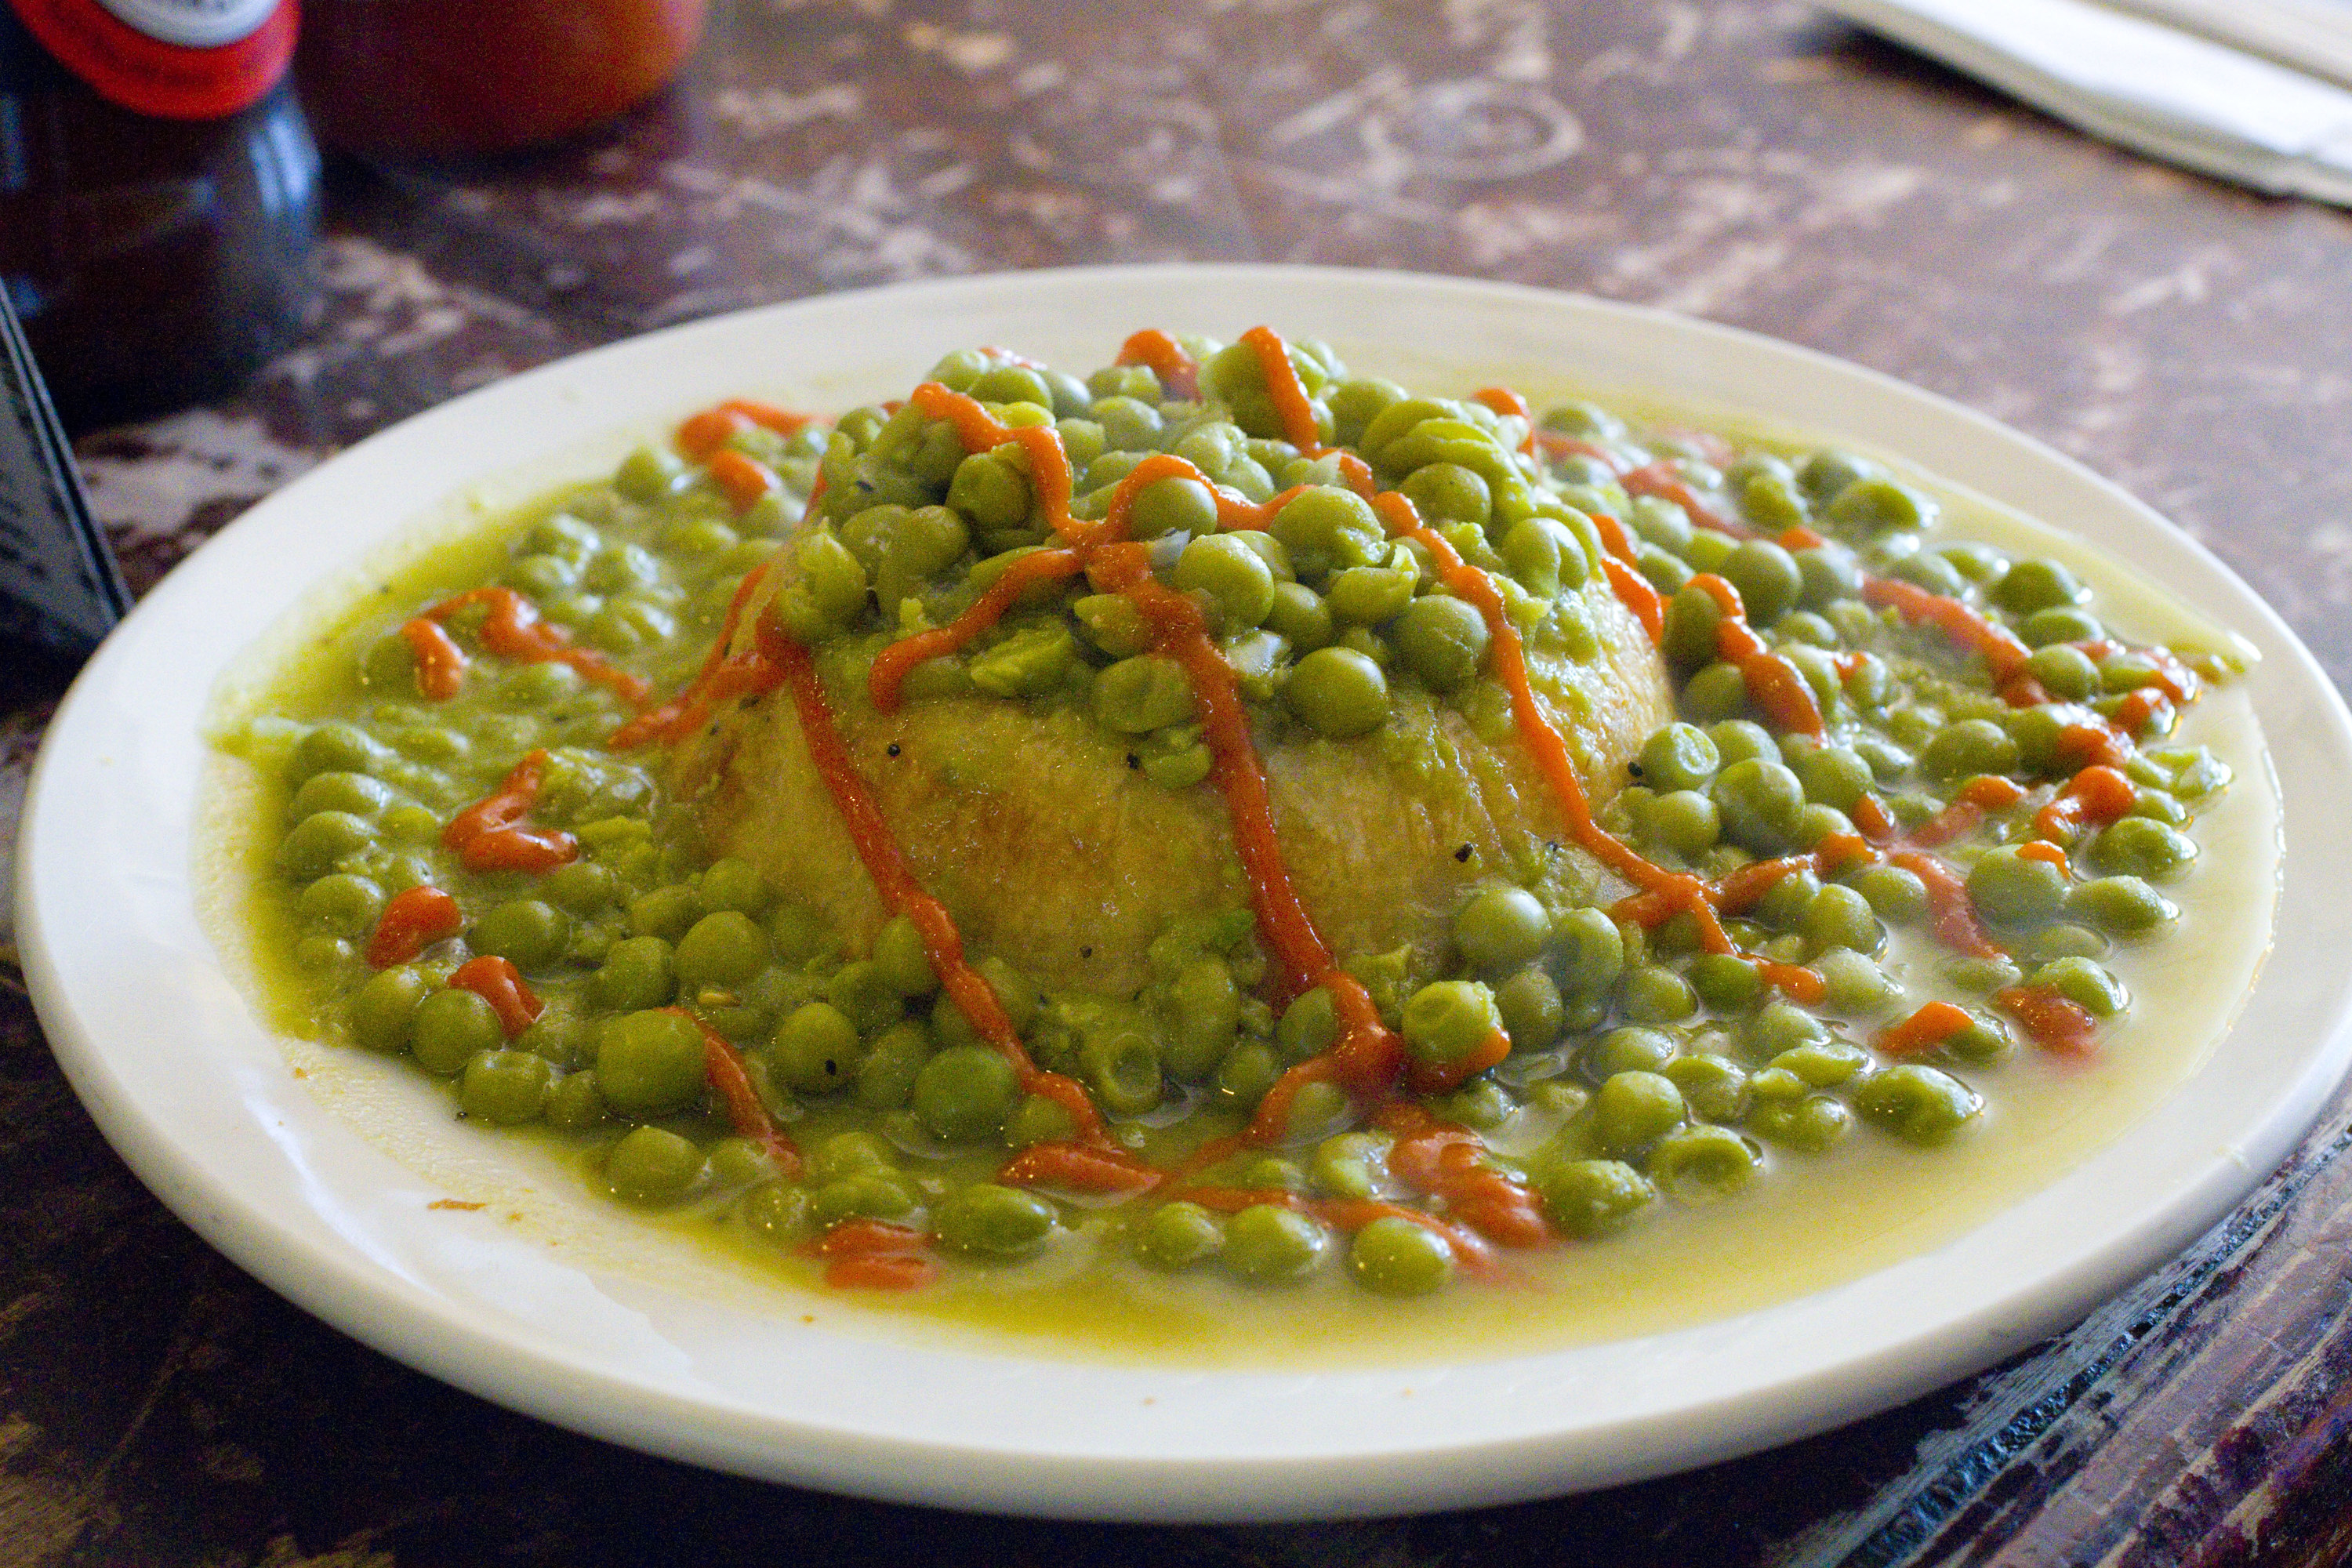 A plate filled with pea soup, an inverted meat pie and a drizzling of tomato sauce